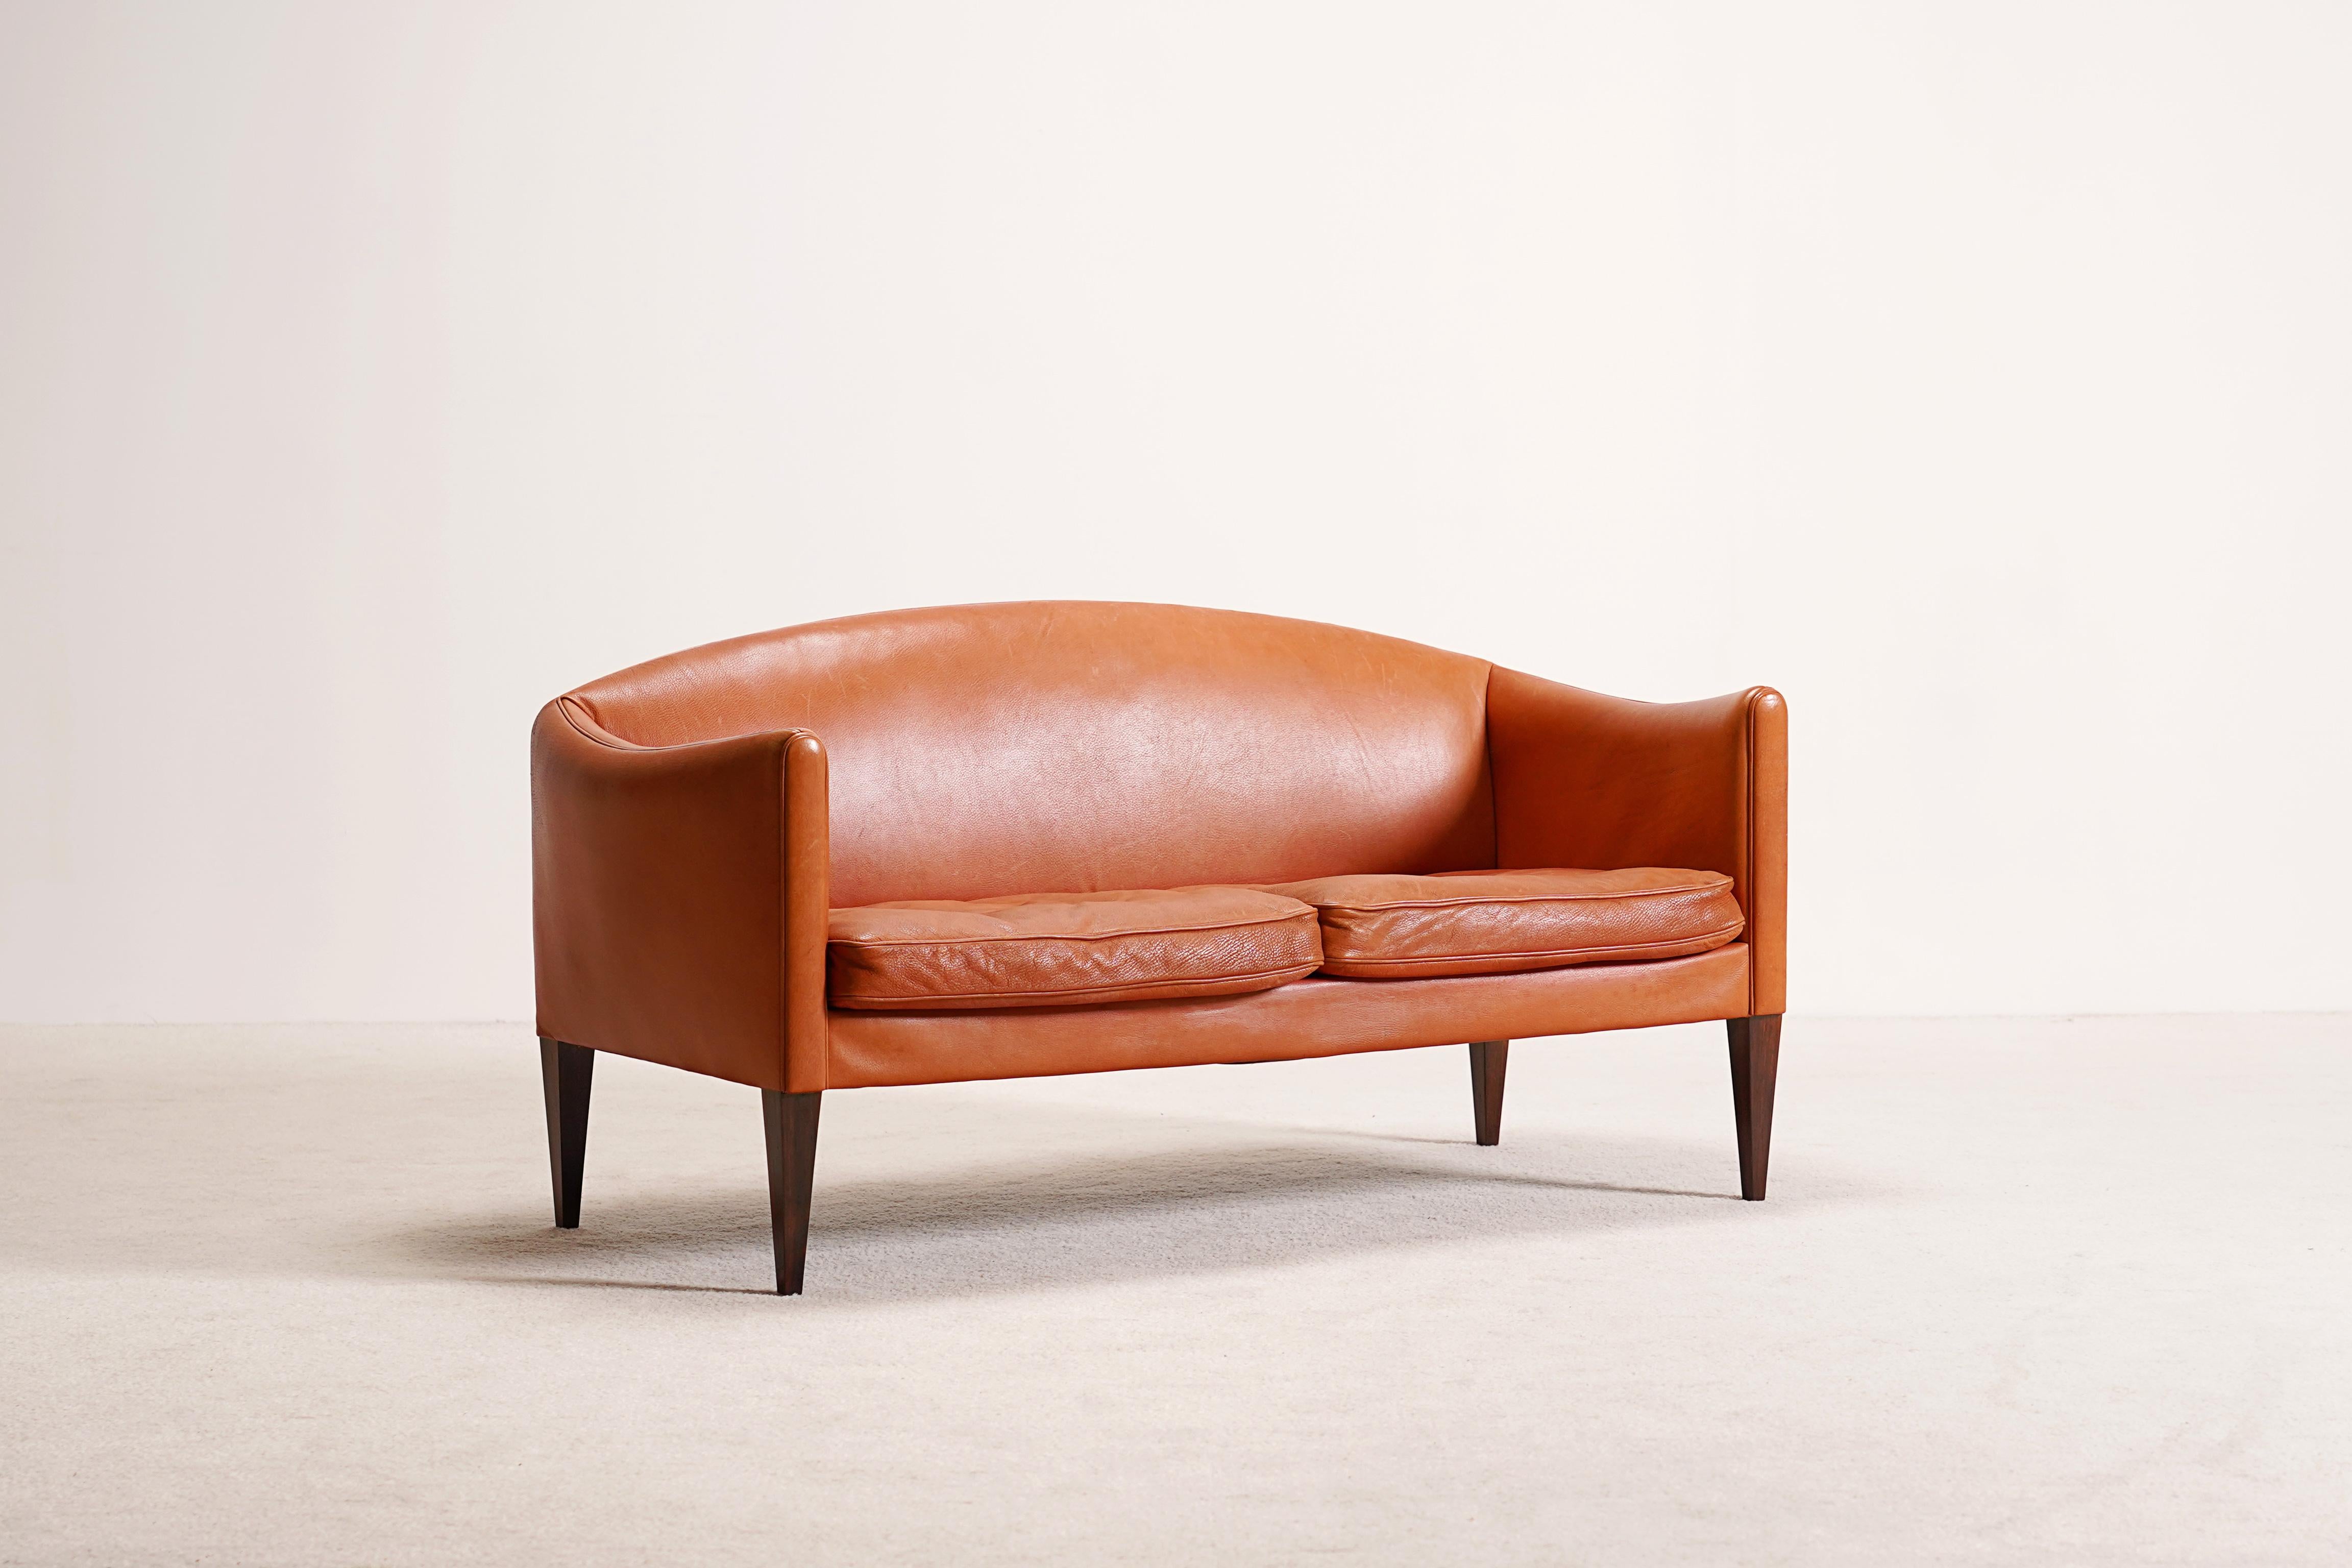 Nice loveseat free-standing sofa Model V12 upholstered in light brown patinated leather, tapered Brazilian rosewood legs.
This very beautiful two-seat sofa was designed by Illum Wikkelsø and produced by Holger Christiansen in the 1960s in